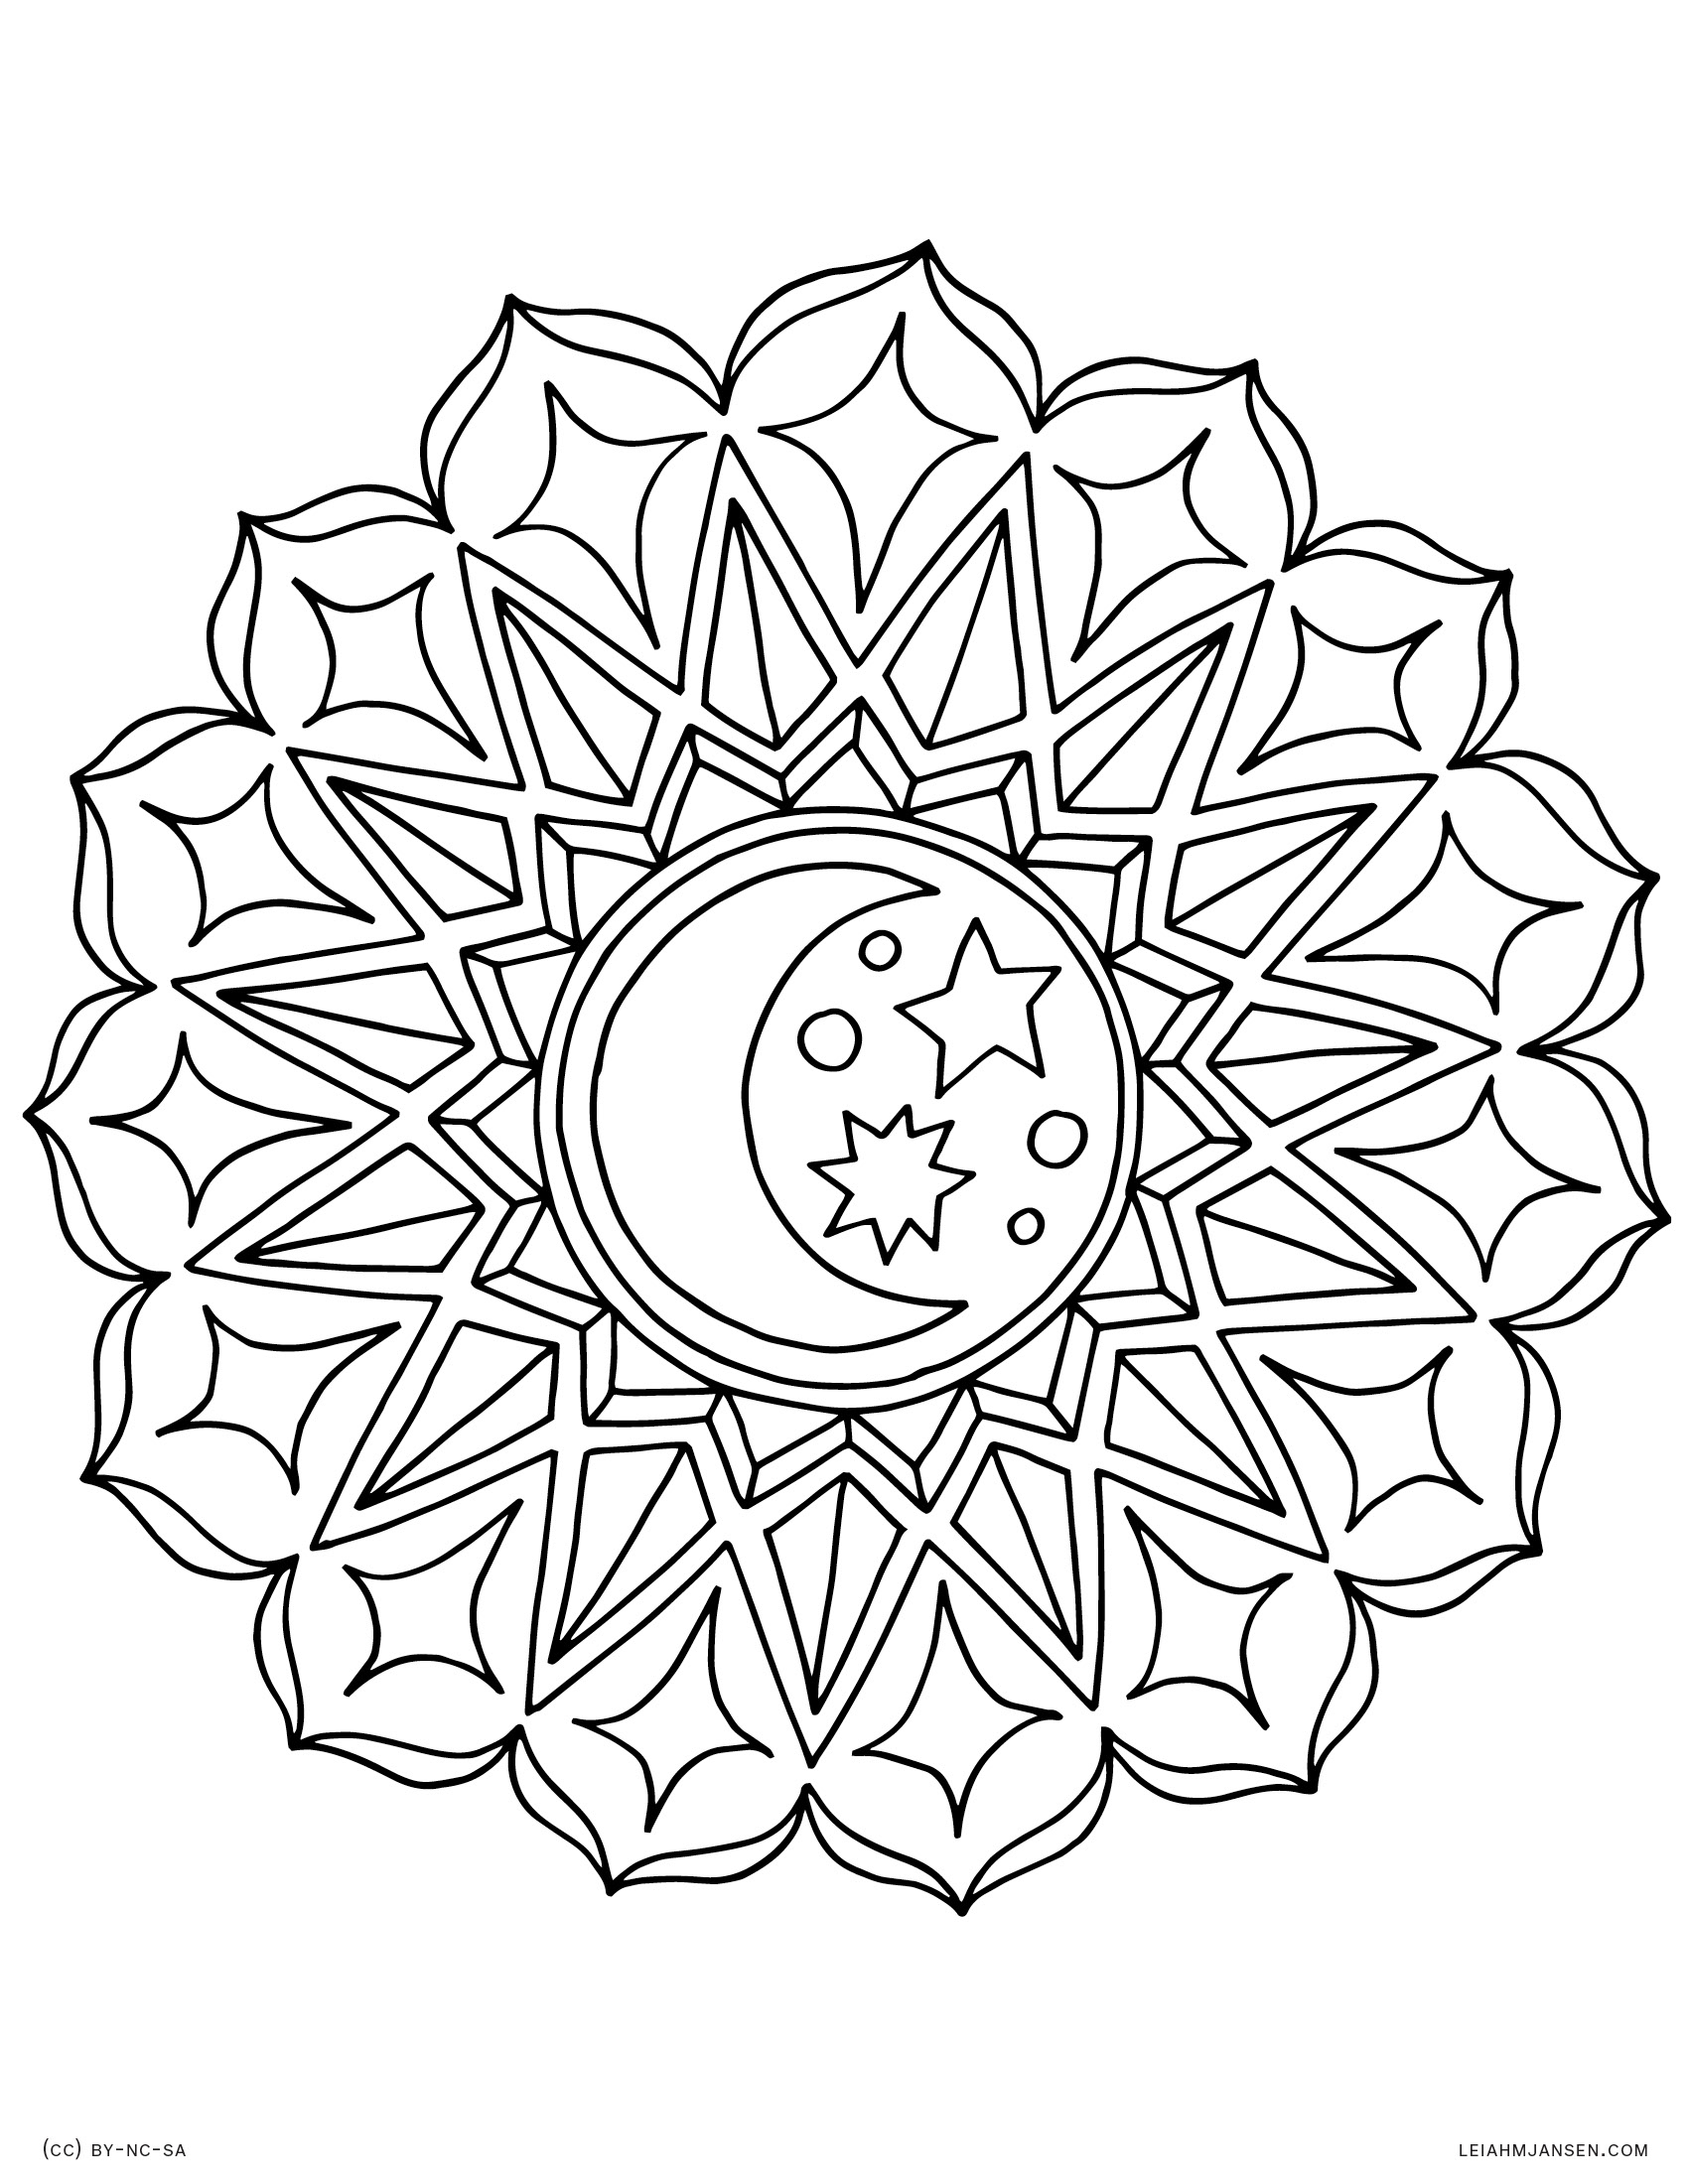 Coloring Pages - Free Printable Mandala Coloring Pages